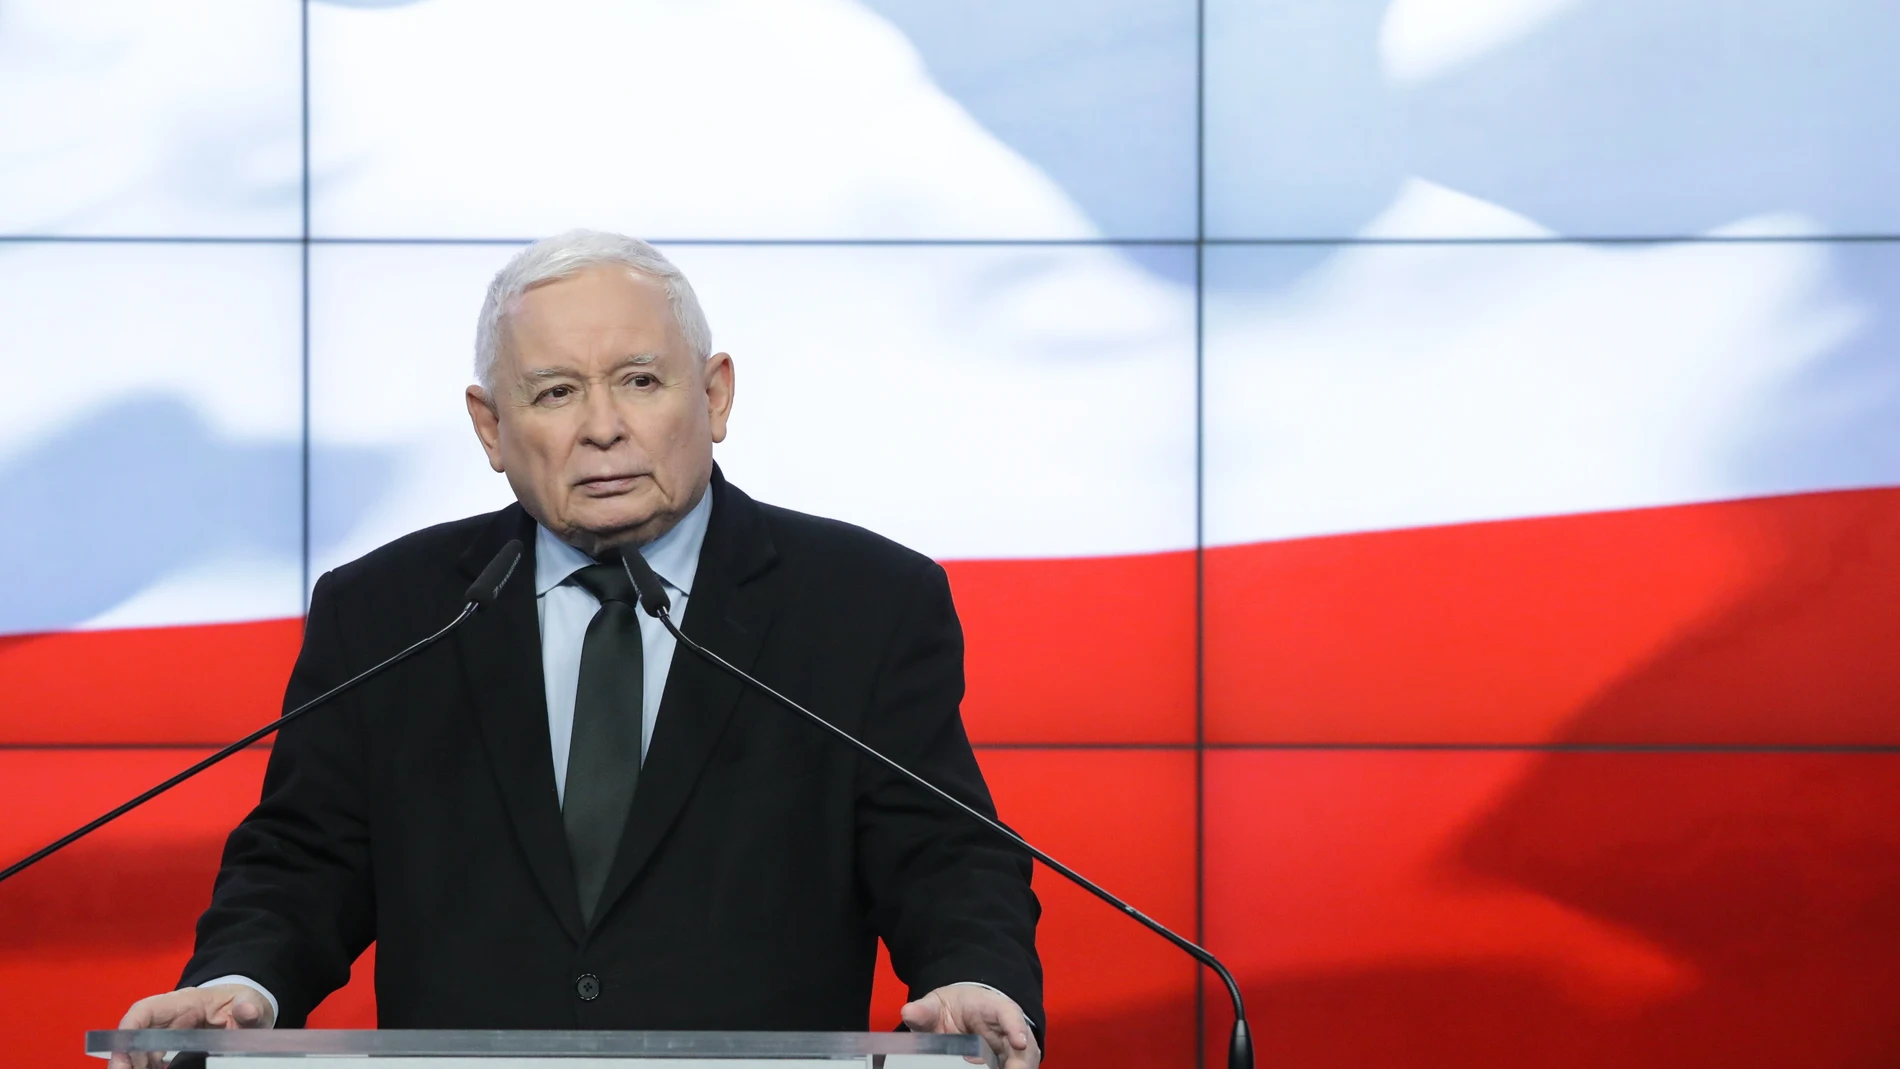 Warsaw (Poland), 14/01/2024.- Poland'Äôs Law and Justice party (PiS) leader Jaroslaw Kaczynski speaks during a press conference at the PiS's headquarters in Warsaw, Poland, 14 January 2024. The leader of the former ruling Law and Justice party has voiced outrage at the recent decision by the Justice Minister who has sacked the head of the National Prosecutor's Office Dariusz Barski and replaced him with an acting national prosecutor. On 12 January, the Justice Ministry led by Adam Bodnar, who...